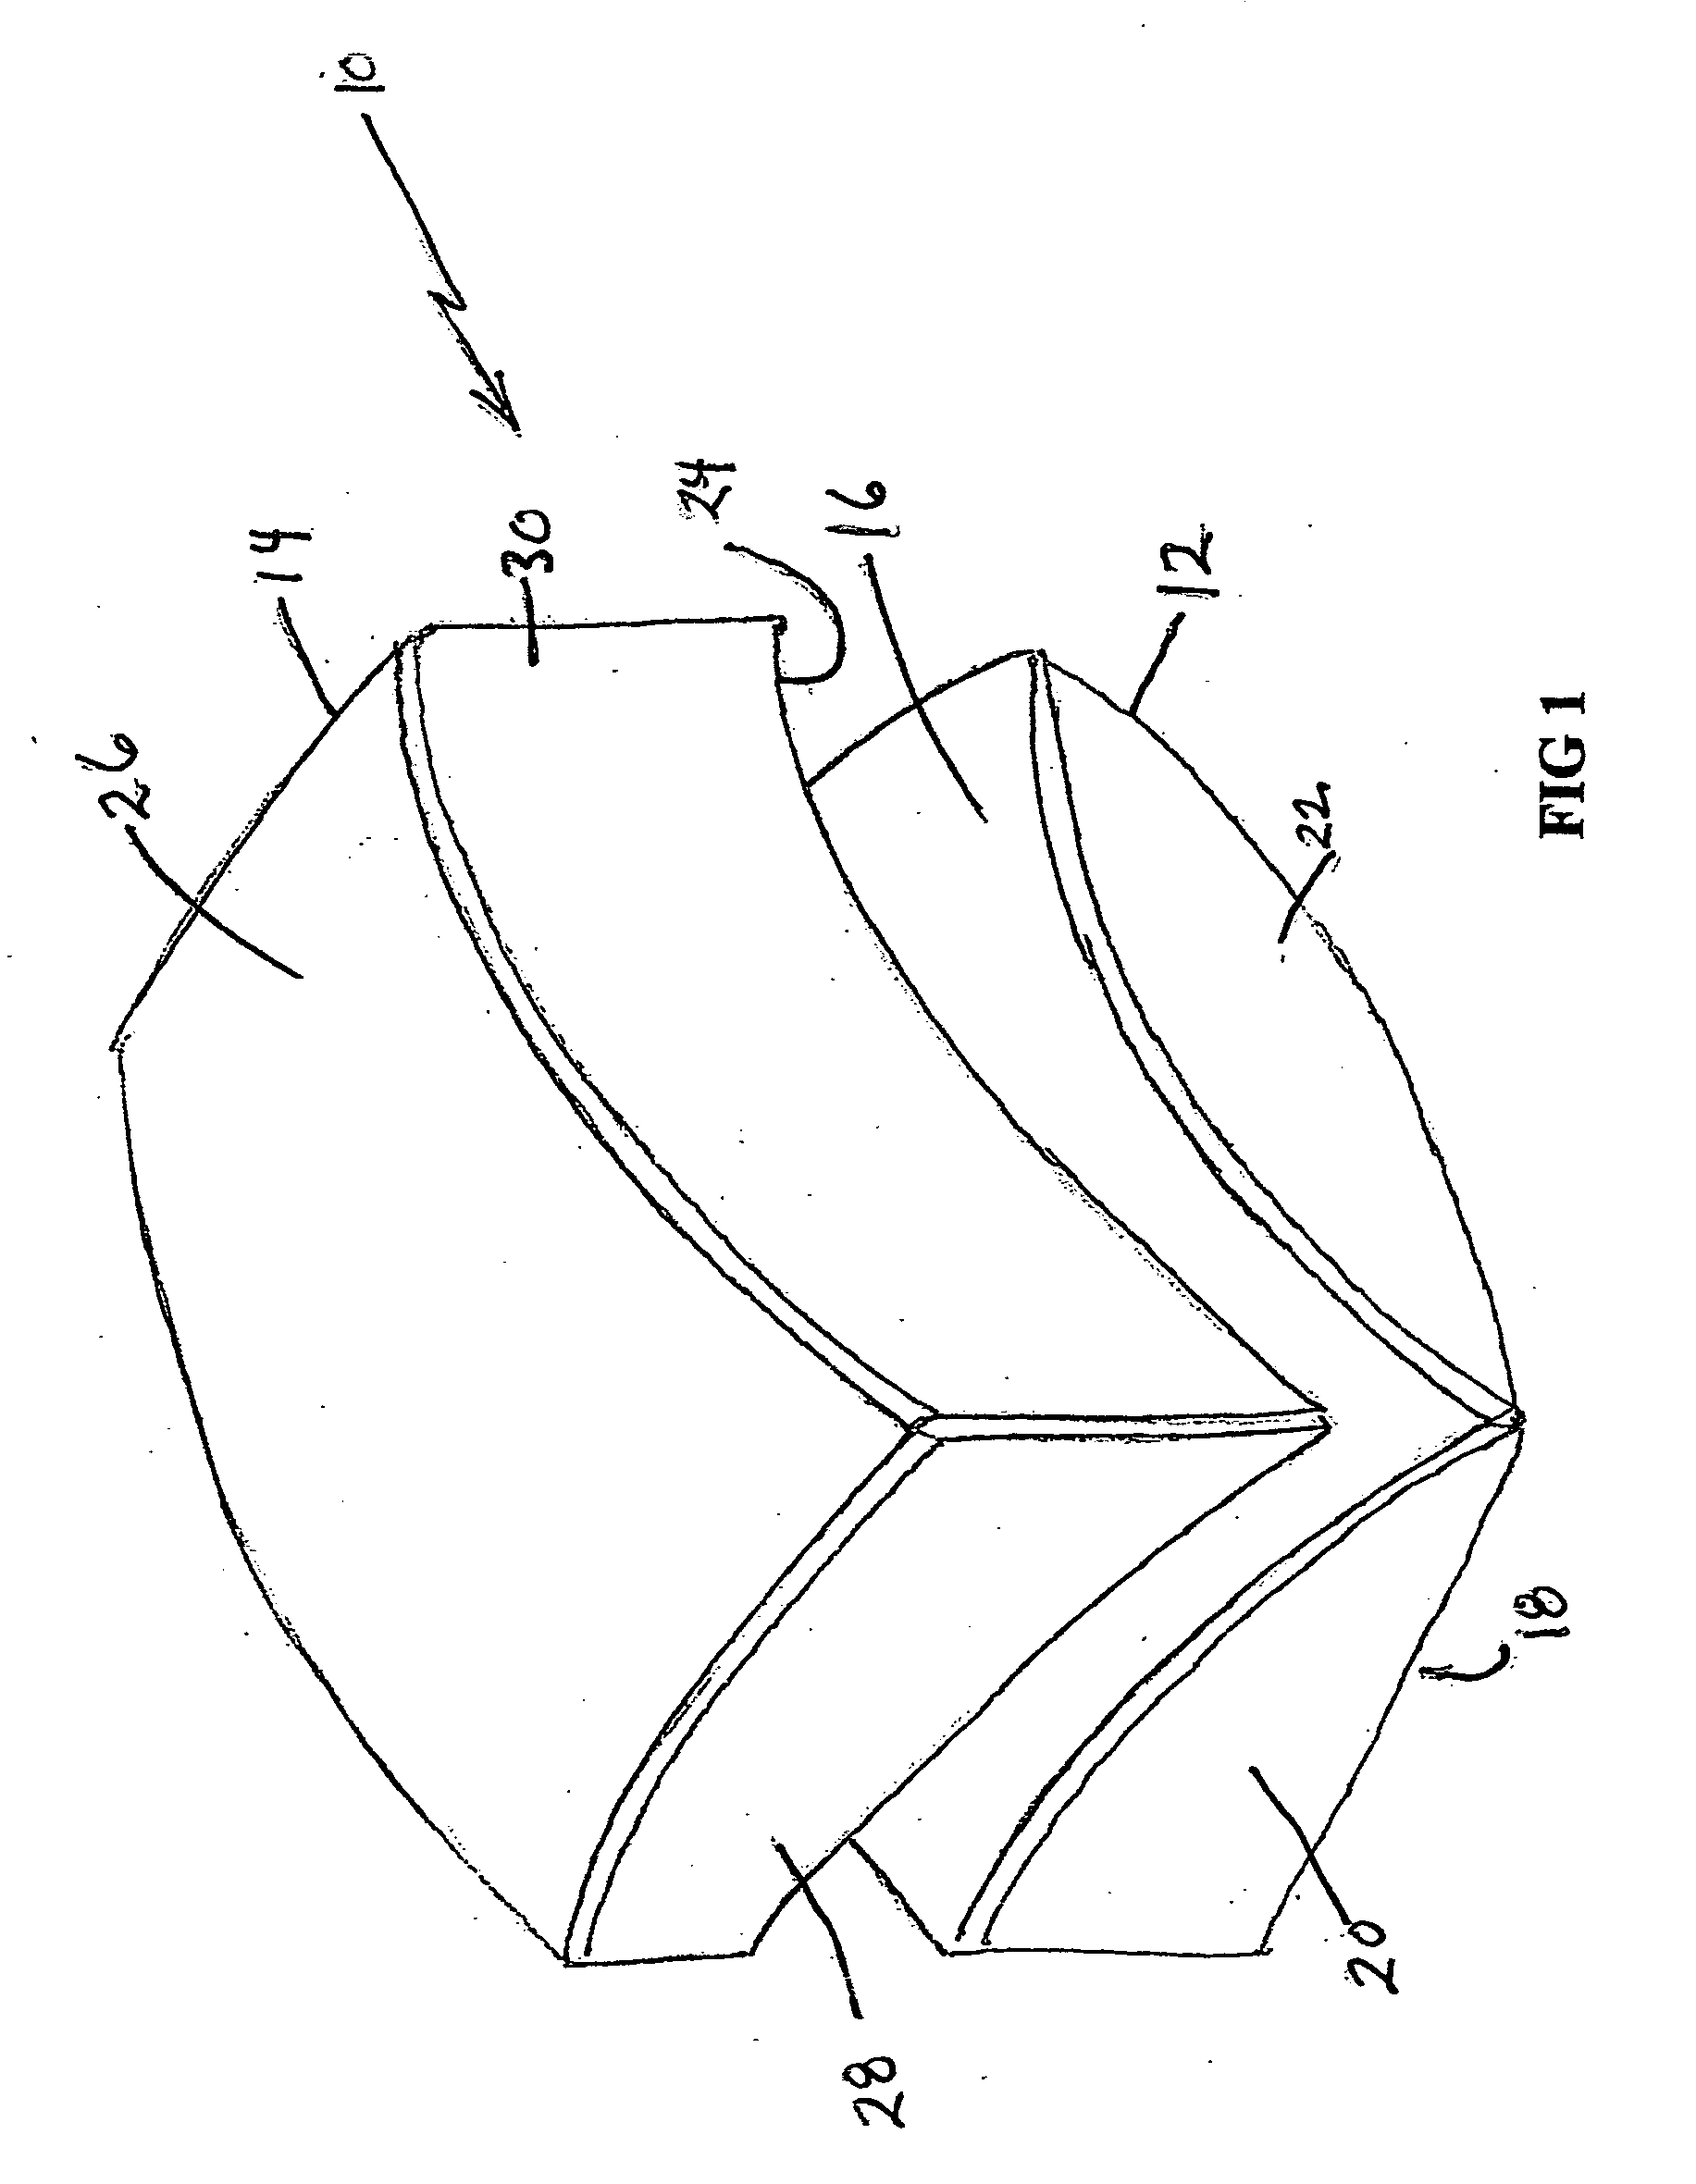 Posterior metal-on-metal disc replacement device and method